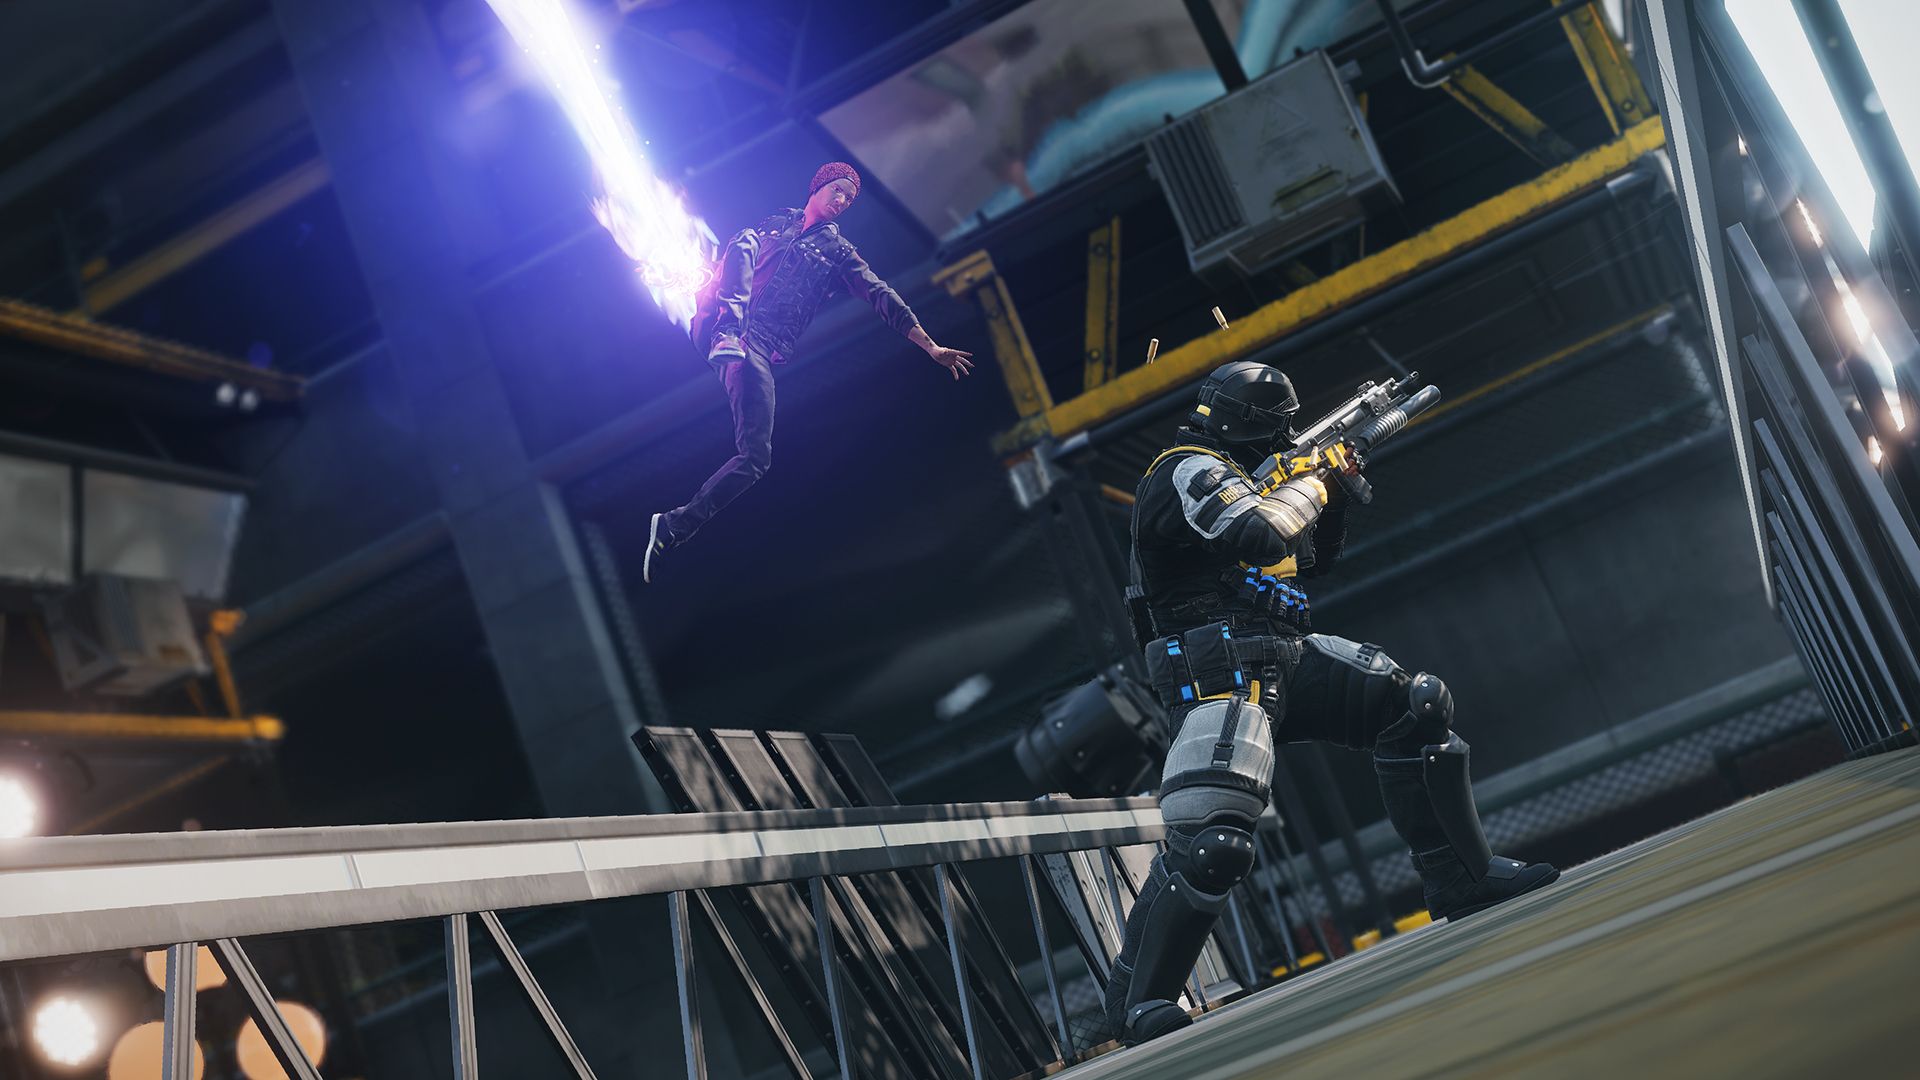 inFAMOUS_Second_Son-neon_ground_pound-638_1385386749